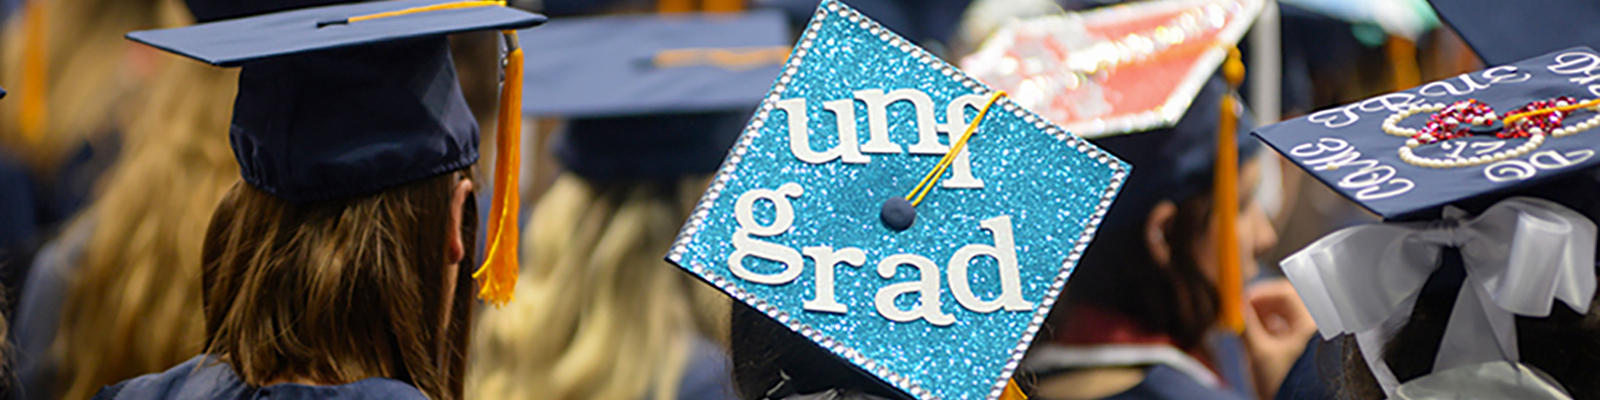 UNF graduates wearing decorated caps and gowns with text of UNF Grad